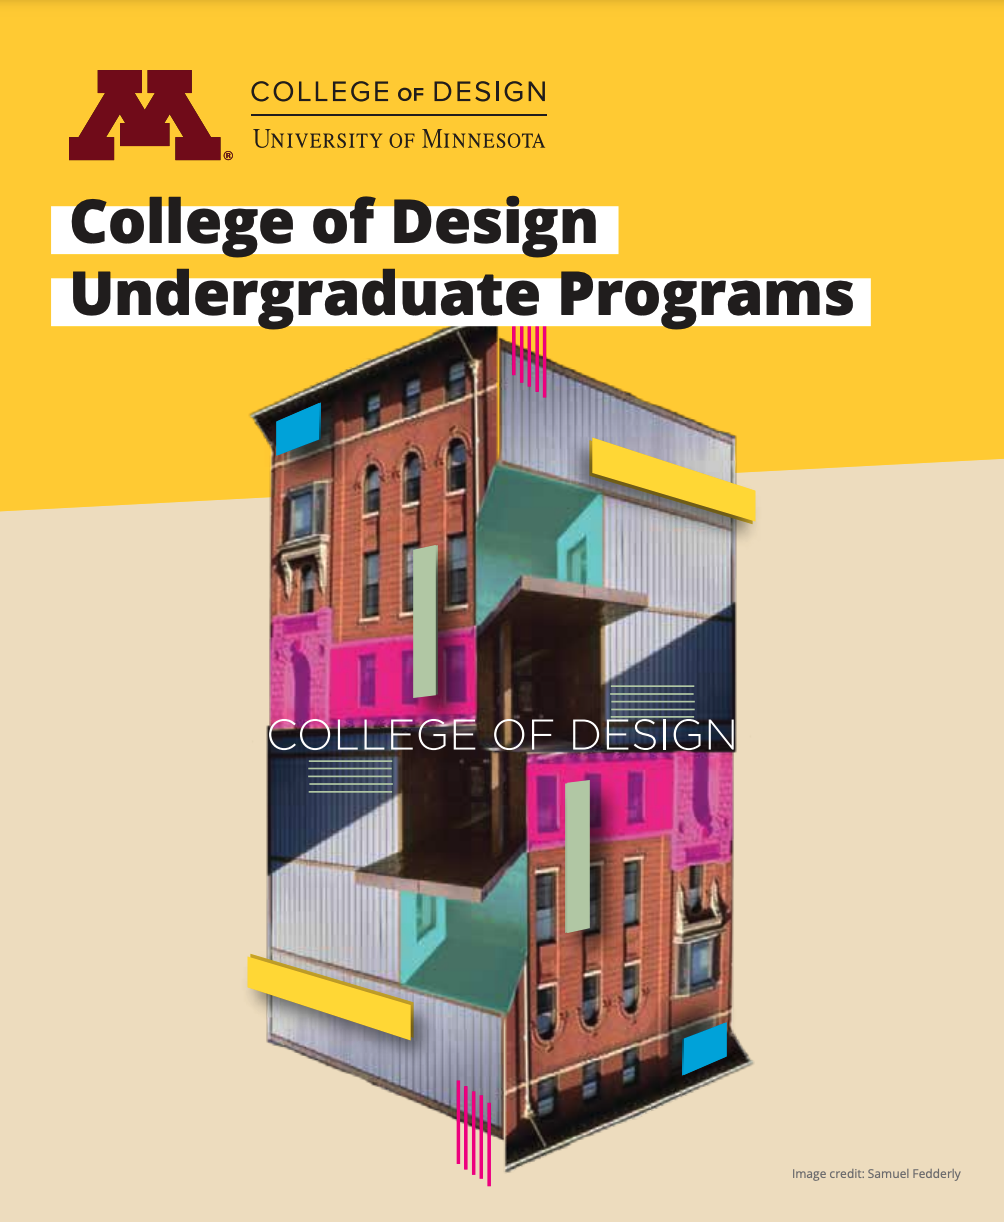 Cover image from College of Design brochure